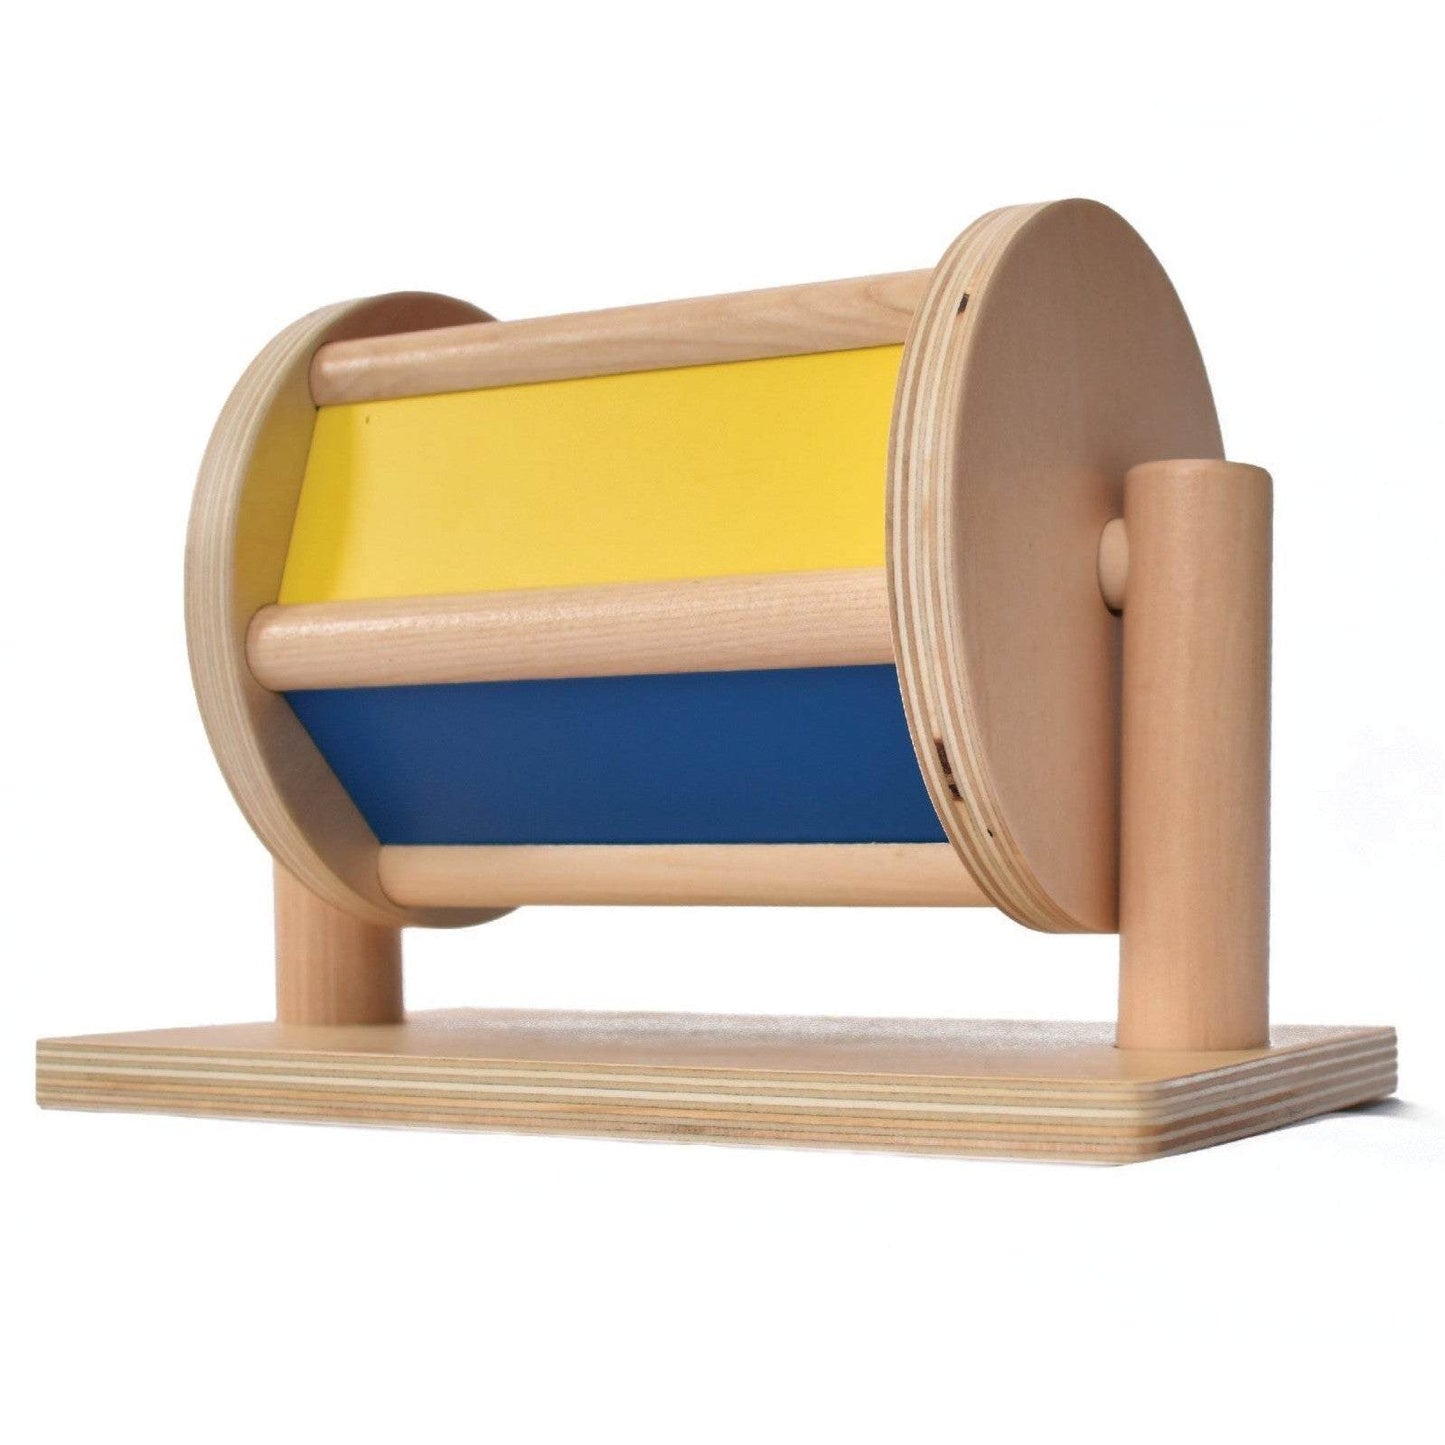 Montessori Spinning Drum showing the yellow and blue panels